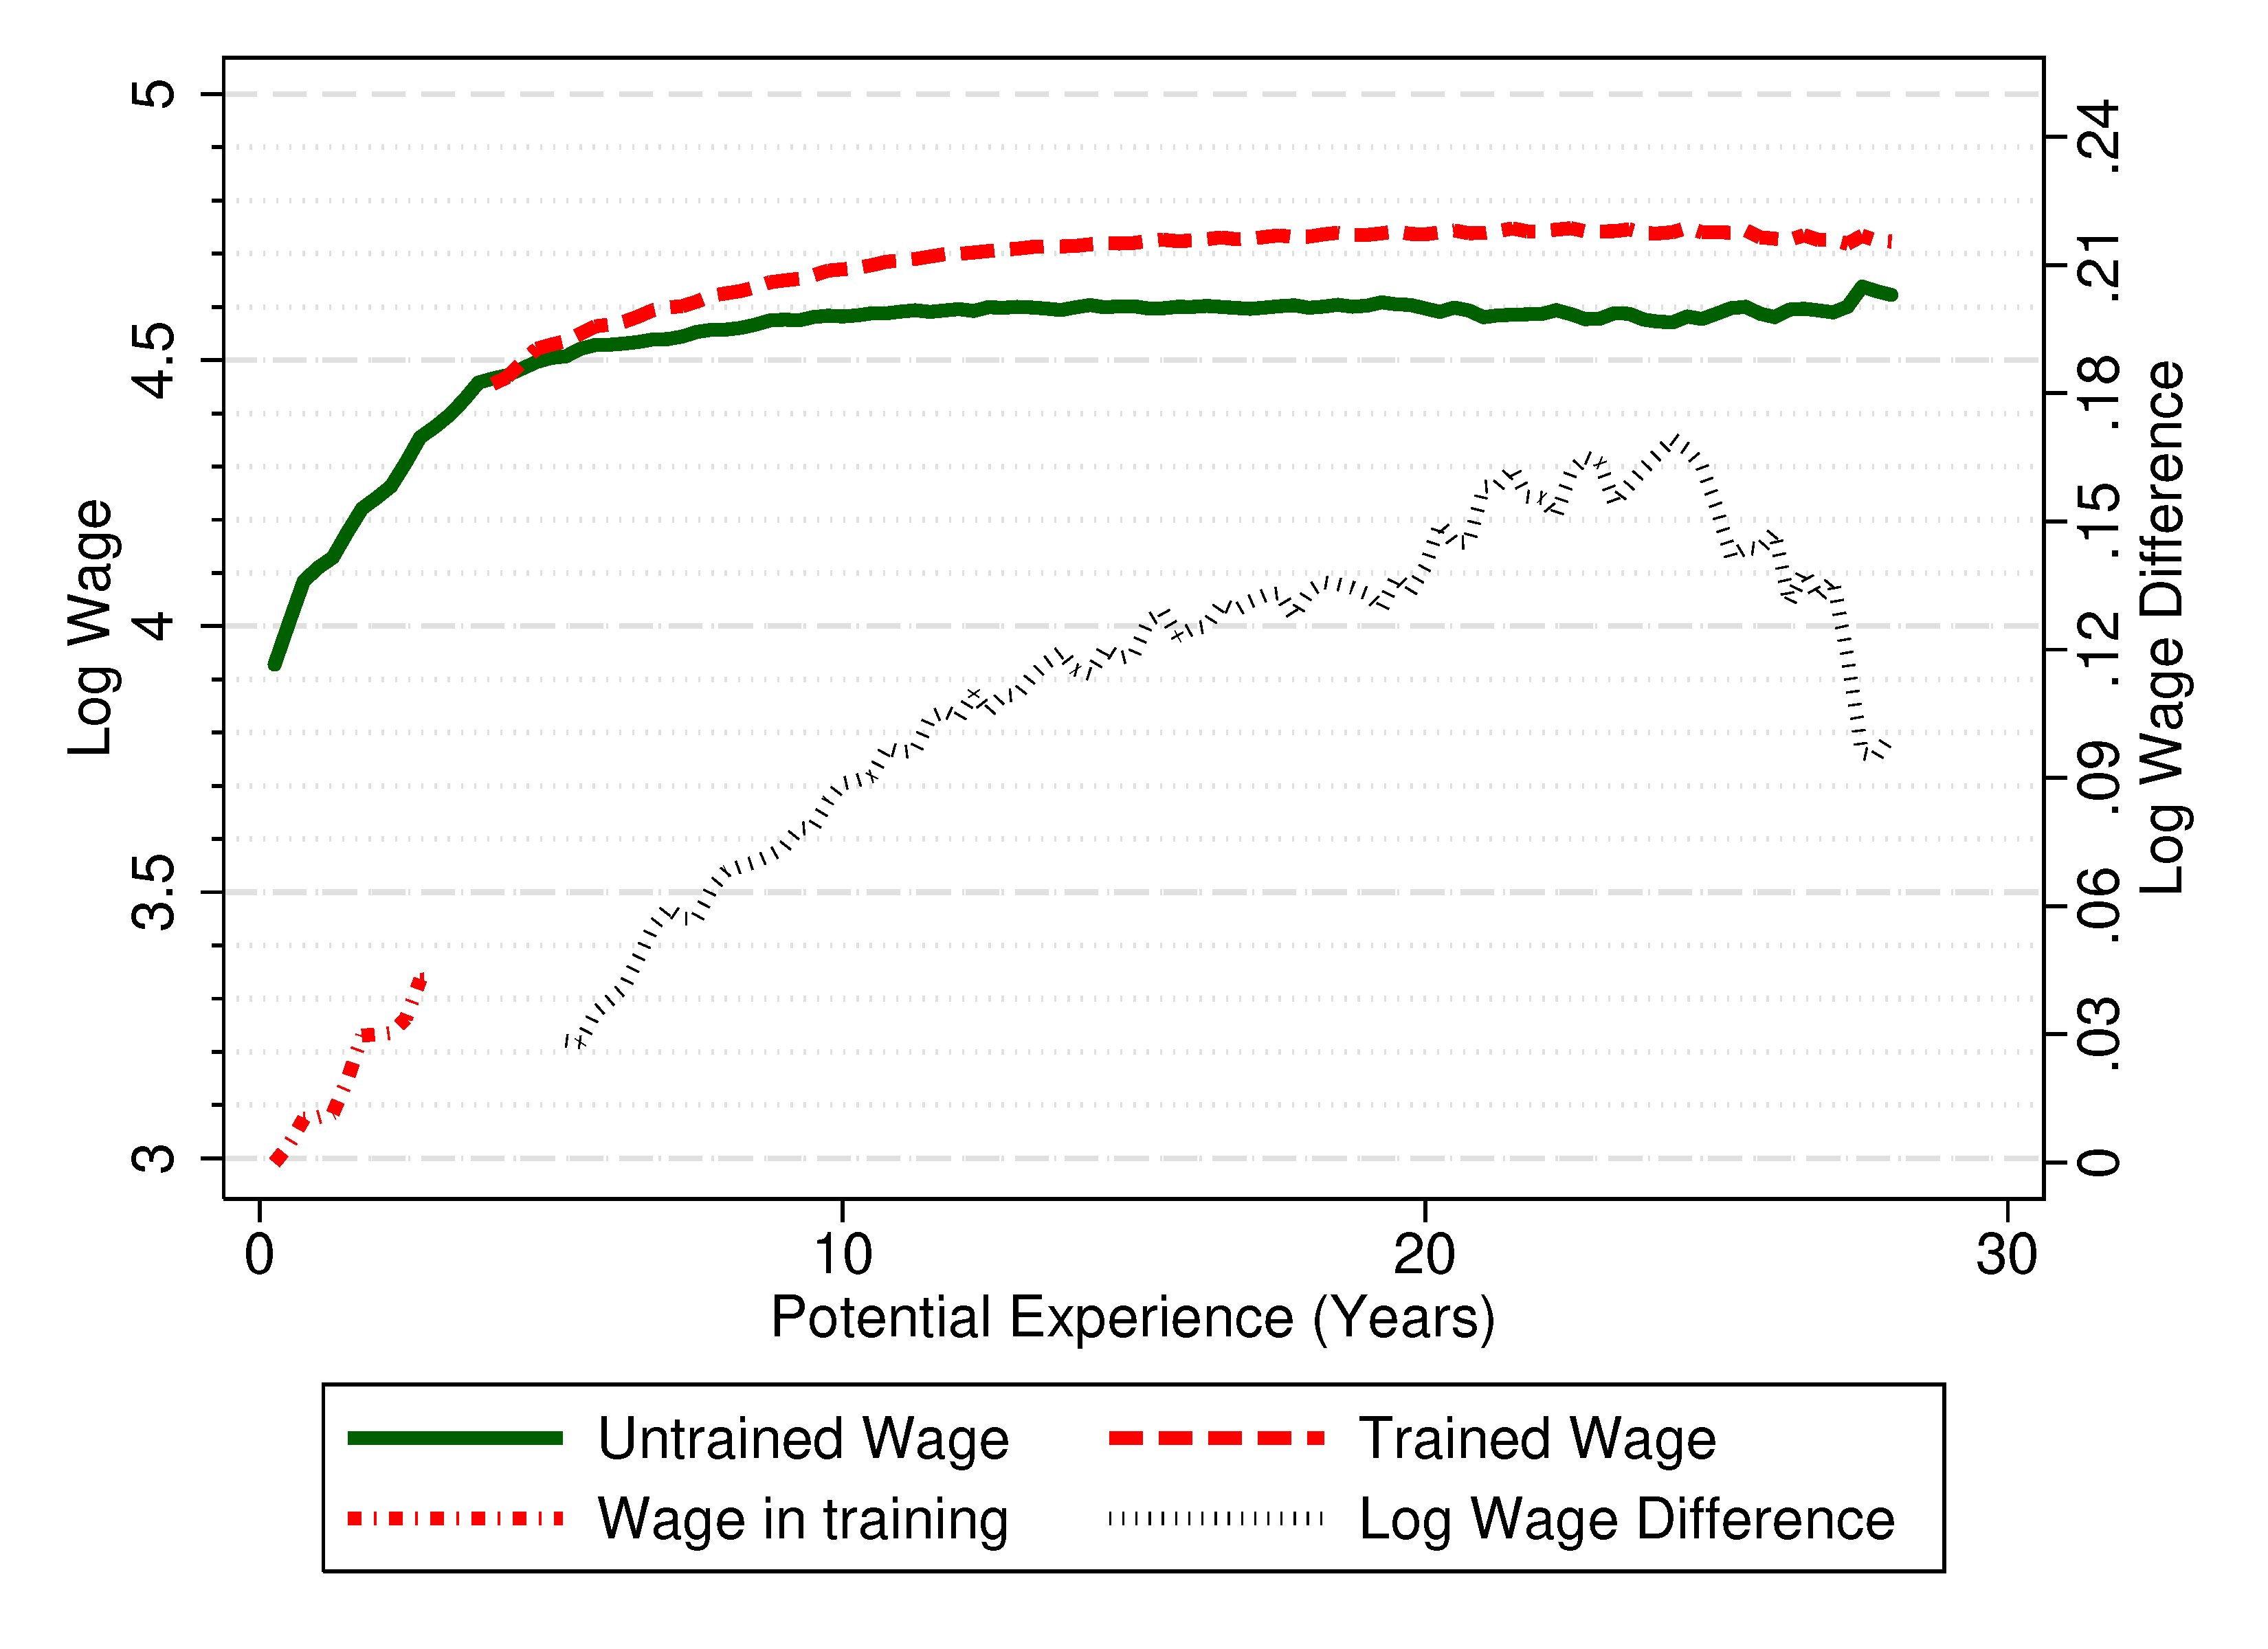 Figure 1 Wage growth of workers by training status